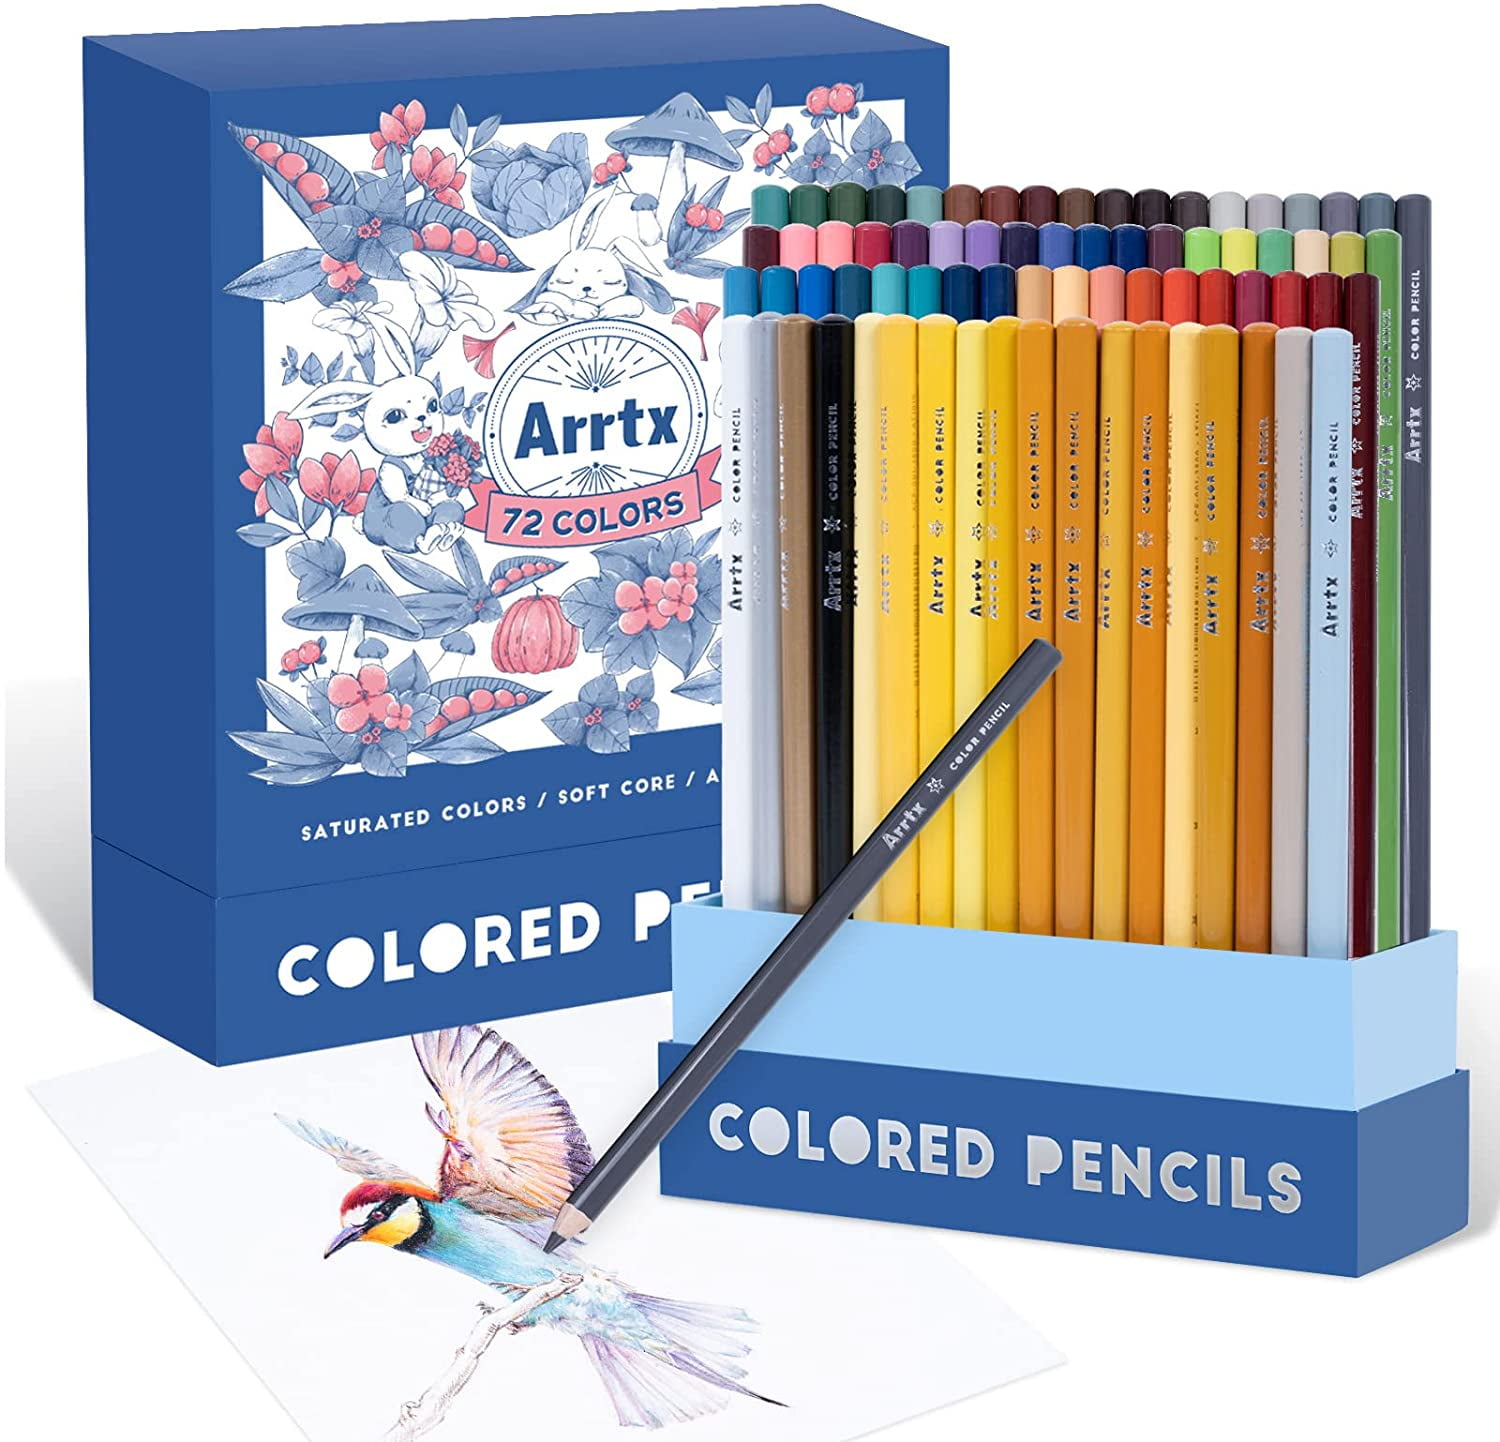 reviewing arrtx 126 pack of colored pencils💗 #coloredpencil #arrtx #a, Colored Pencils